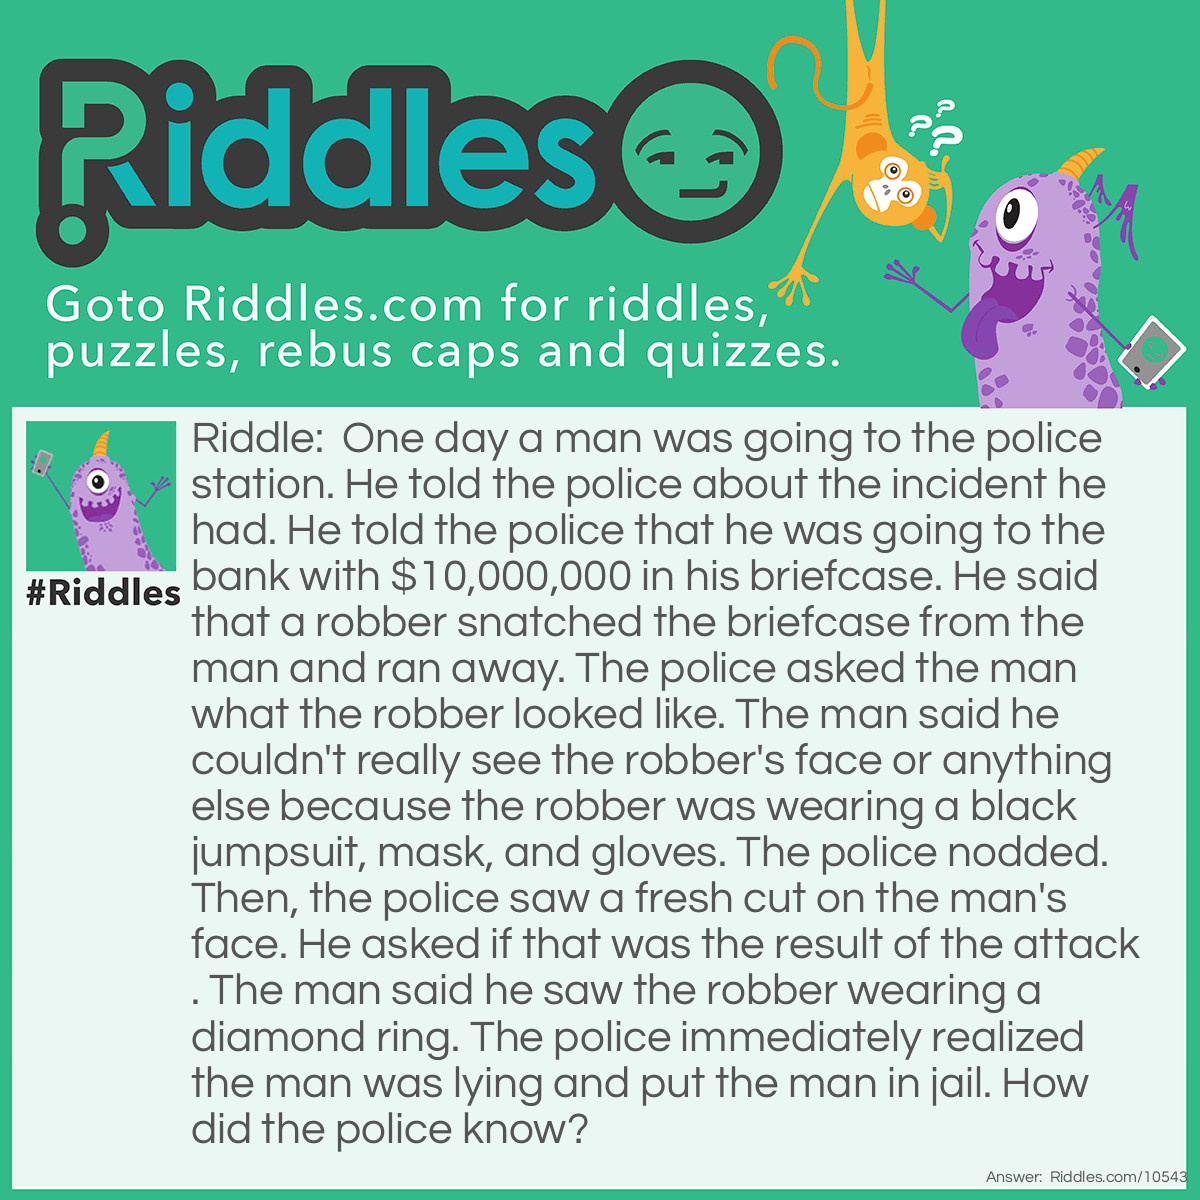 Riddle: One day a man was going to the police station. He told the police about the incident he had. He told the police that he was going to the bank with $10,000,000 in his briefcase. He said that a robber snatched the briefcase from the man and ran away. The police asked the man what the robber looked like. The man said he couldn't really see the robber's face or anything else because the robber was wearing a black jumpsuit, mask, and gloves. The police nodded. Then, the police saw a fresh cut on the man's face. He asked if that was the result of the attack. The man said he saw the robber wearing a diamond ring. The police immediately realized the man was lying and put the man in jail. How did the police know? Answer: The man said that the robber was wearing black gloves. Who wears a ring on top of their gloves?